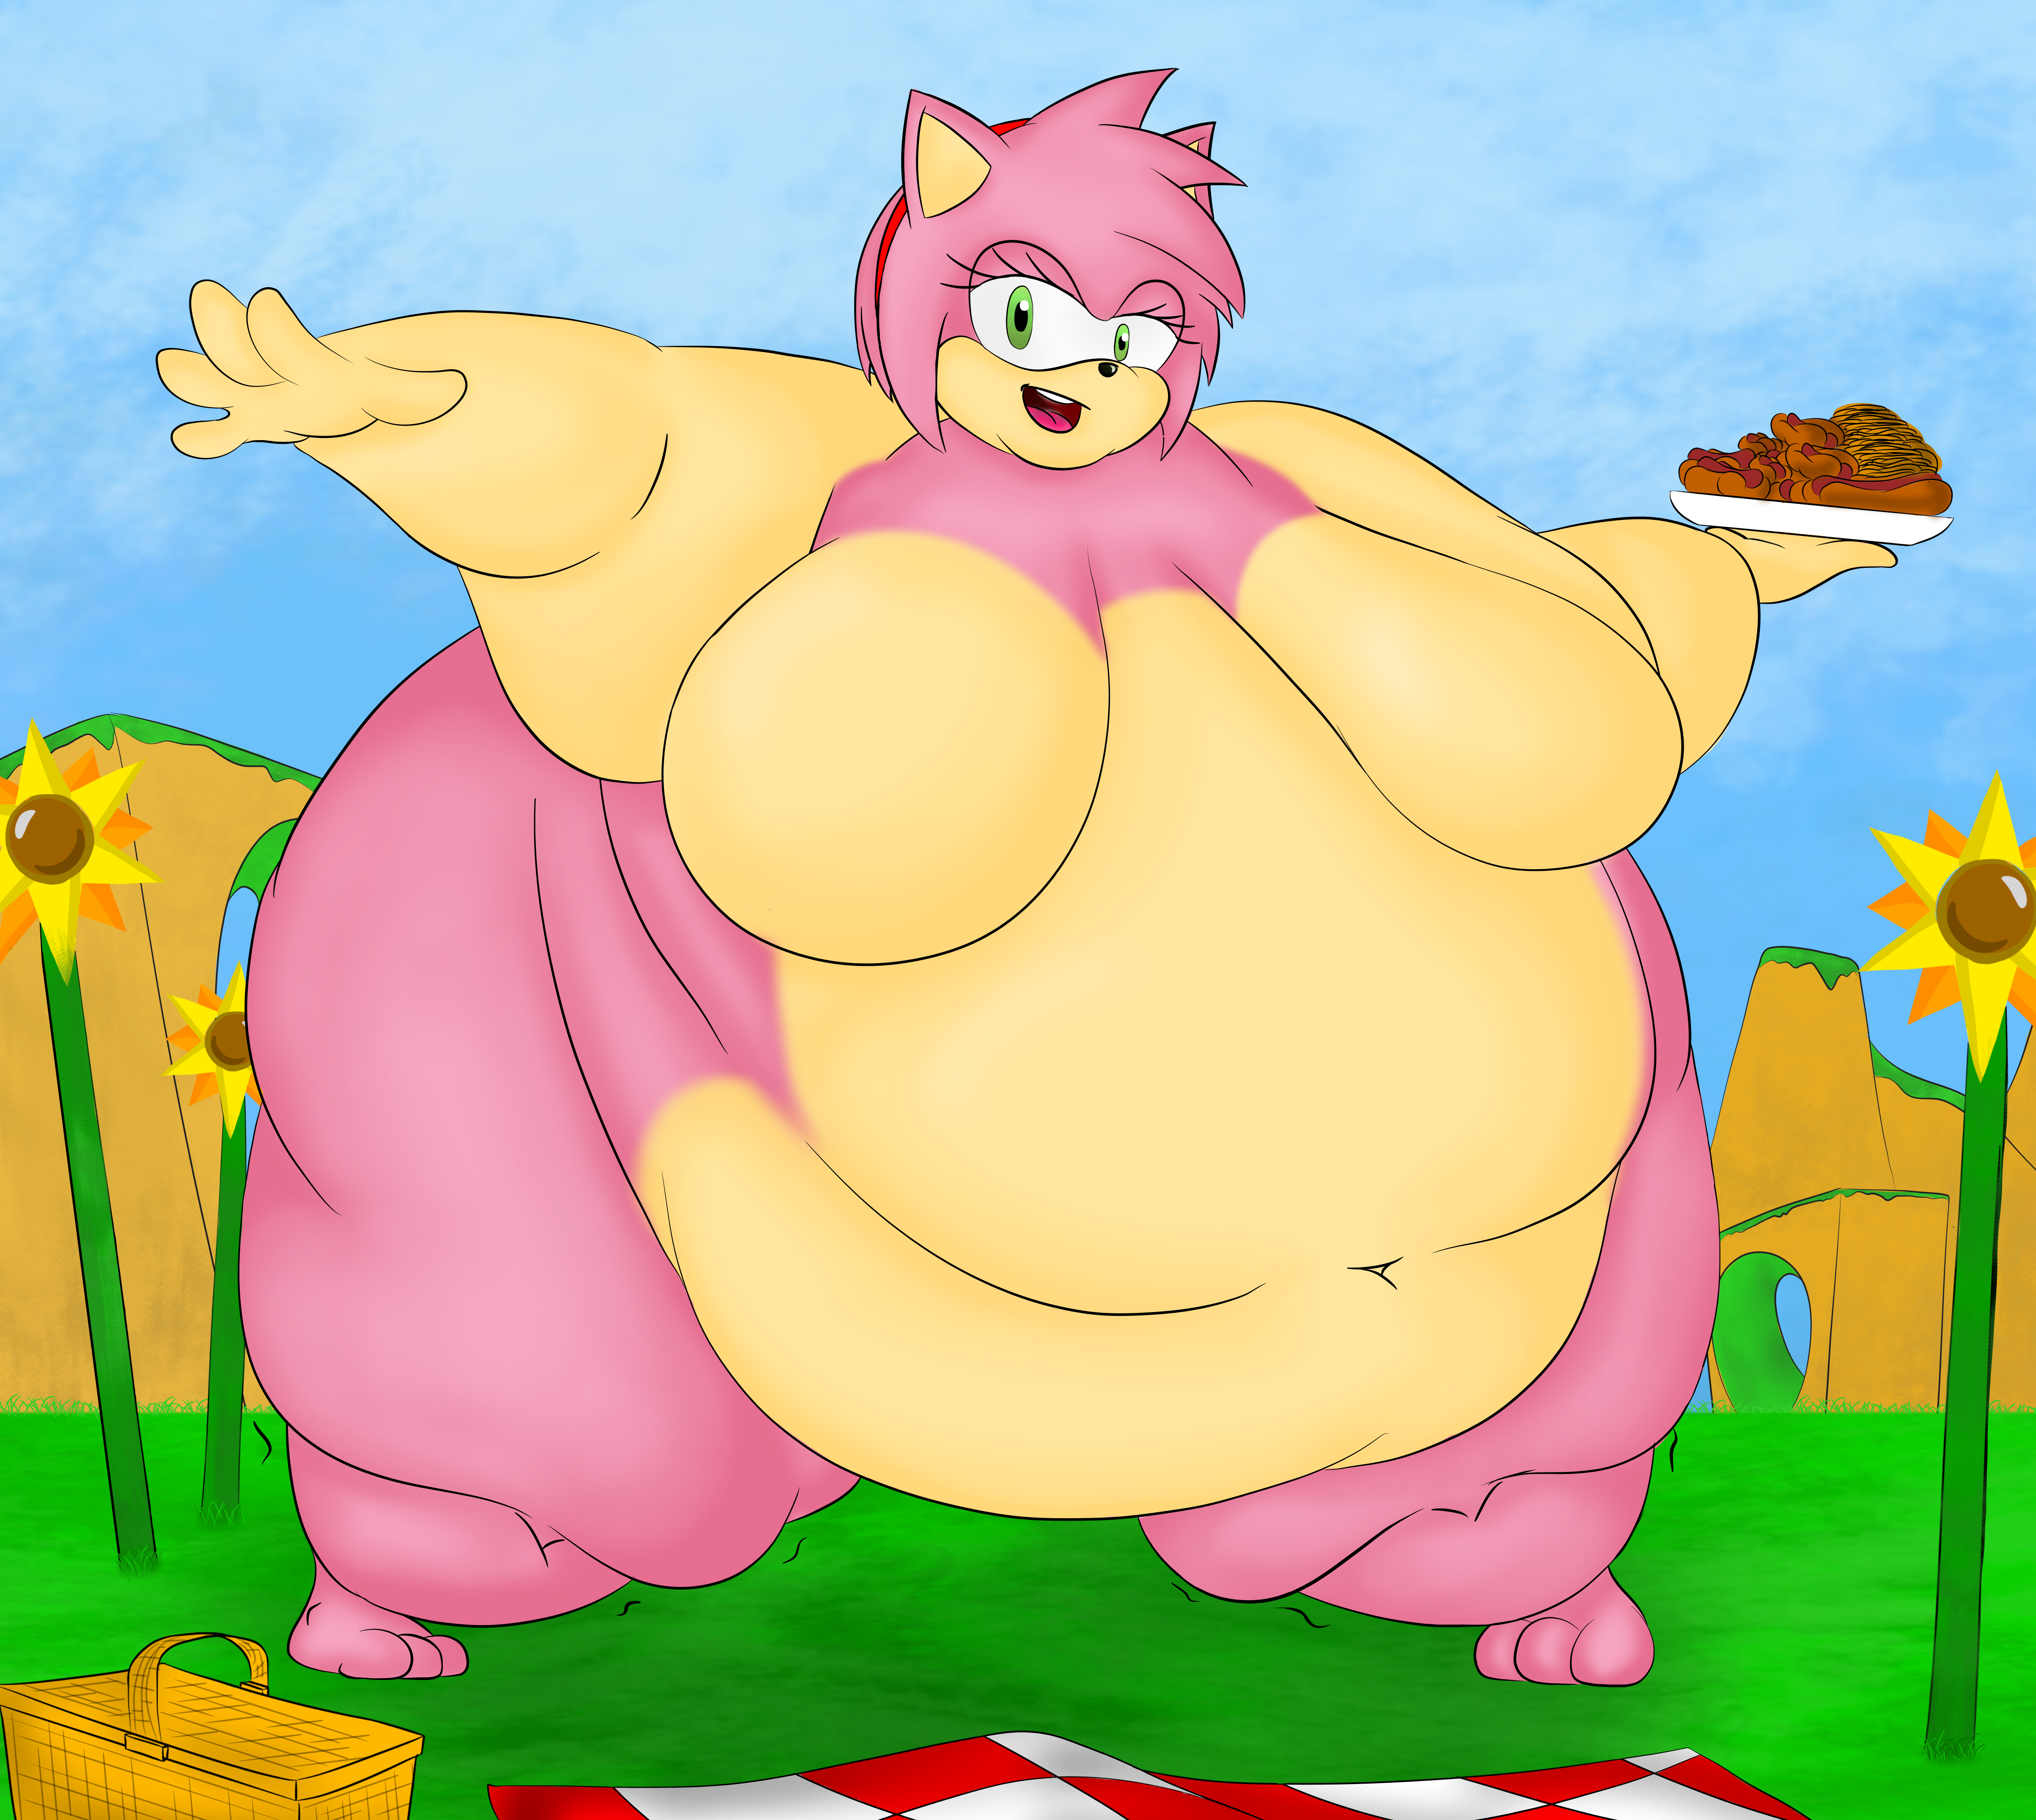 Amy rose weight gain